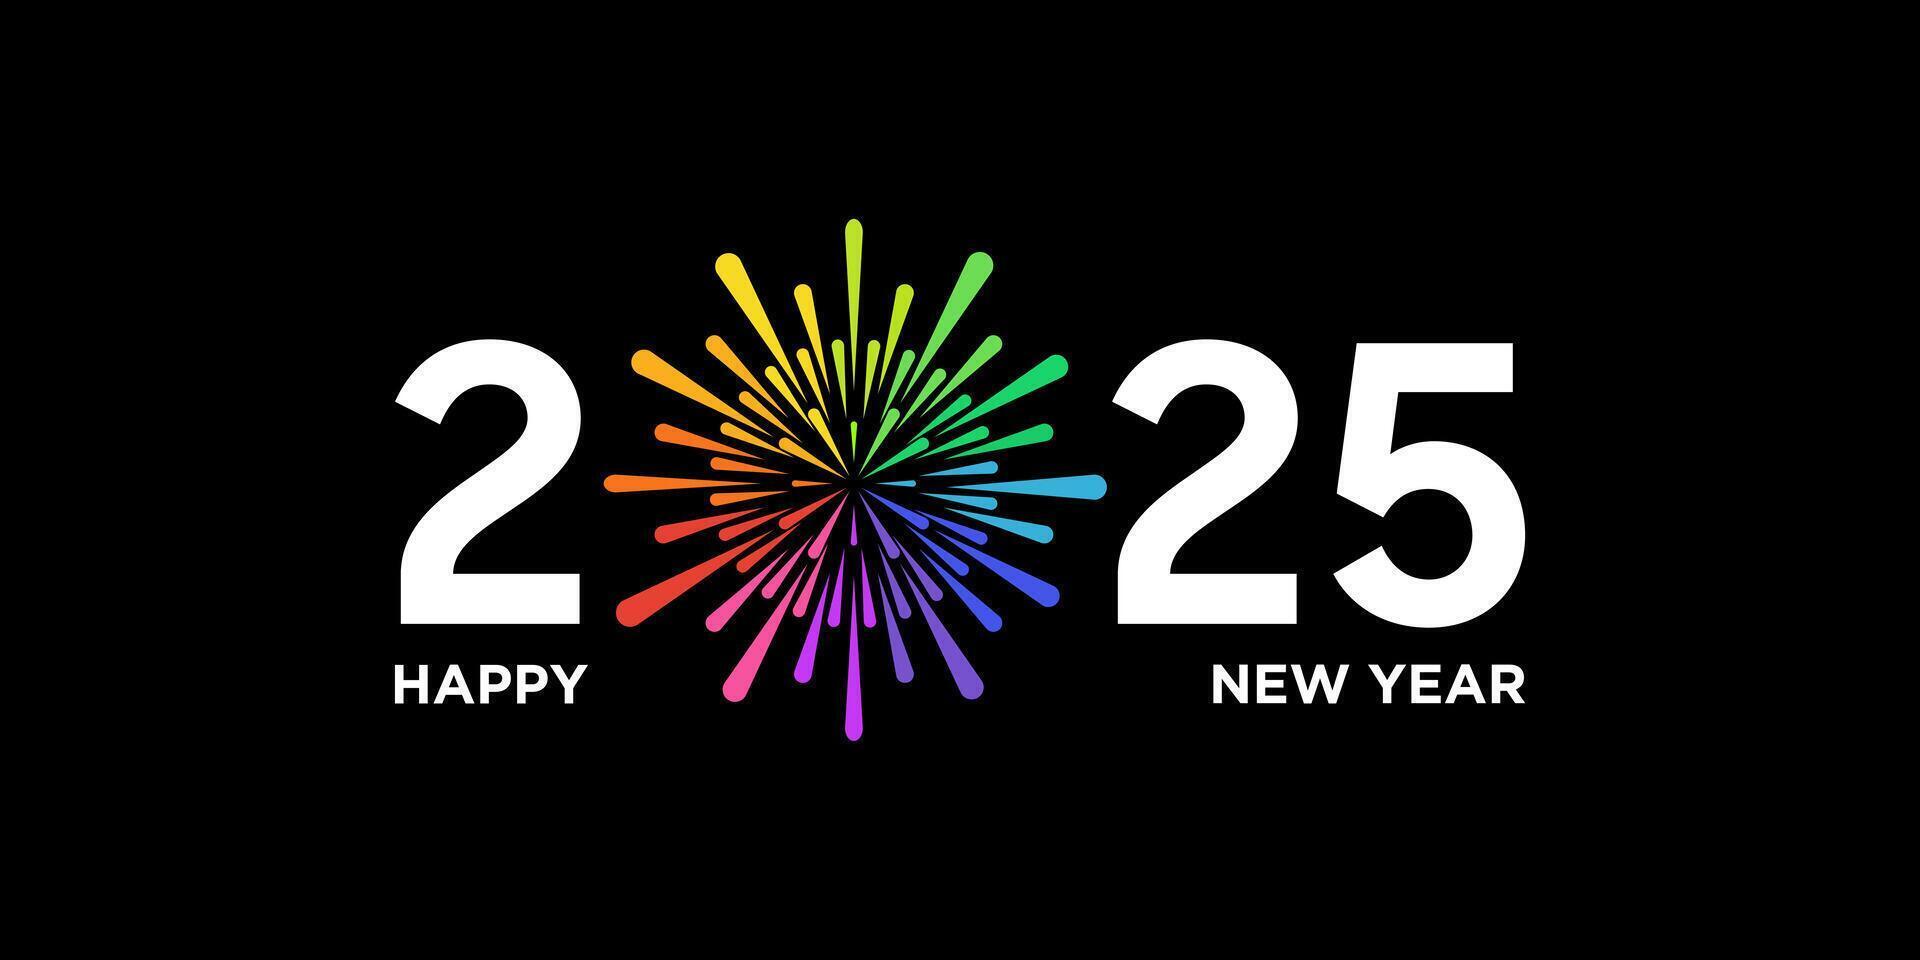 2025 new year logo design with colorful, fireworks, 2025 calendar vector